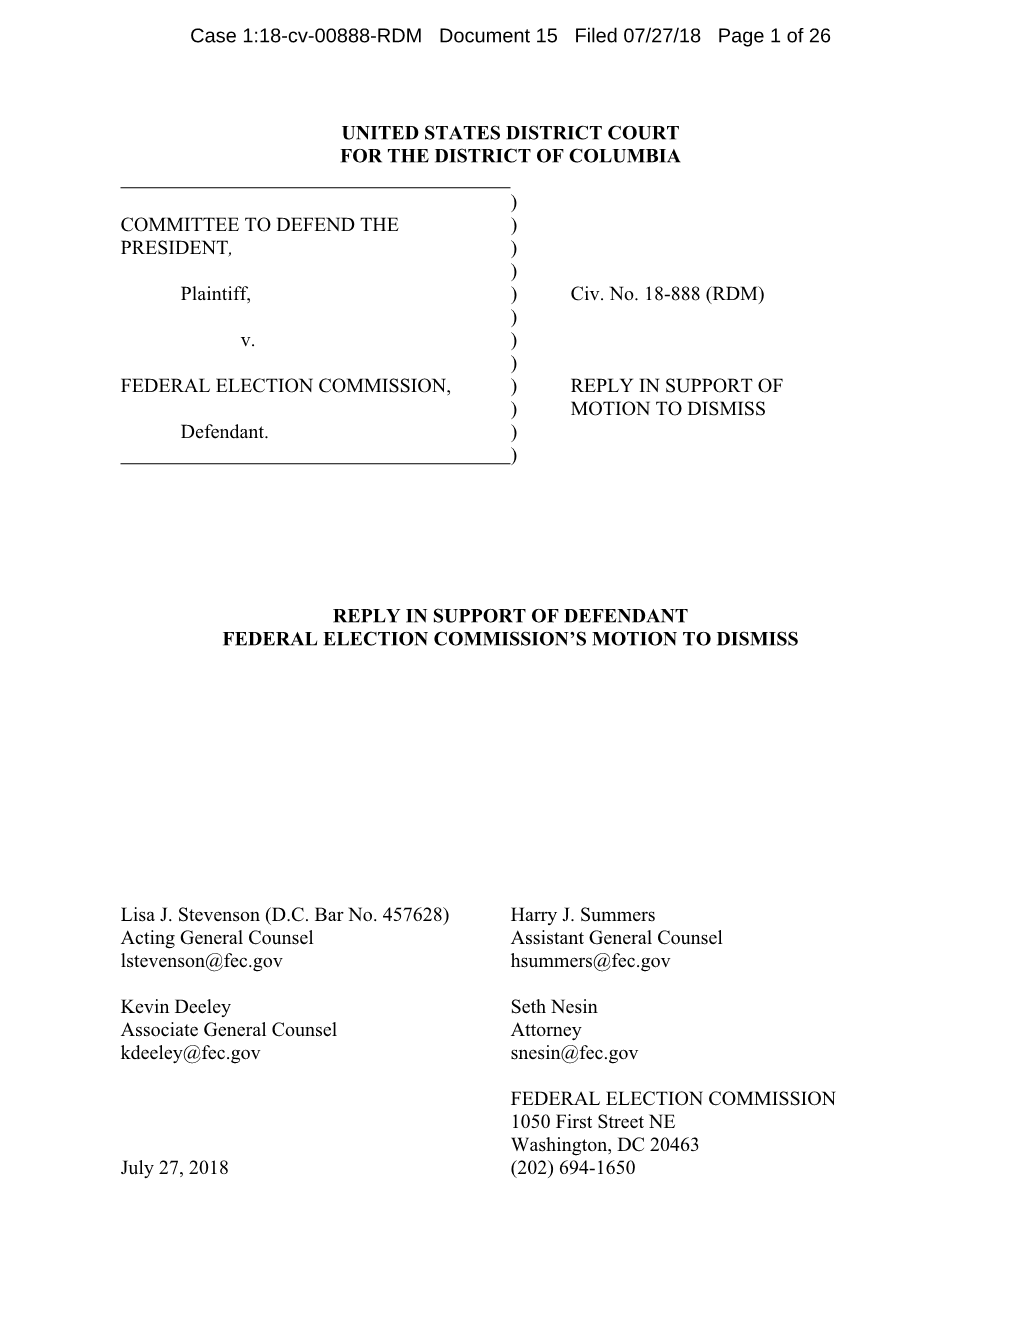 CDP V. FEC Reply in Support of FEC's Motion to Dismiss Filed July 27, 2018